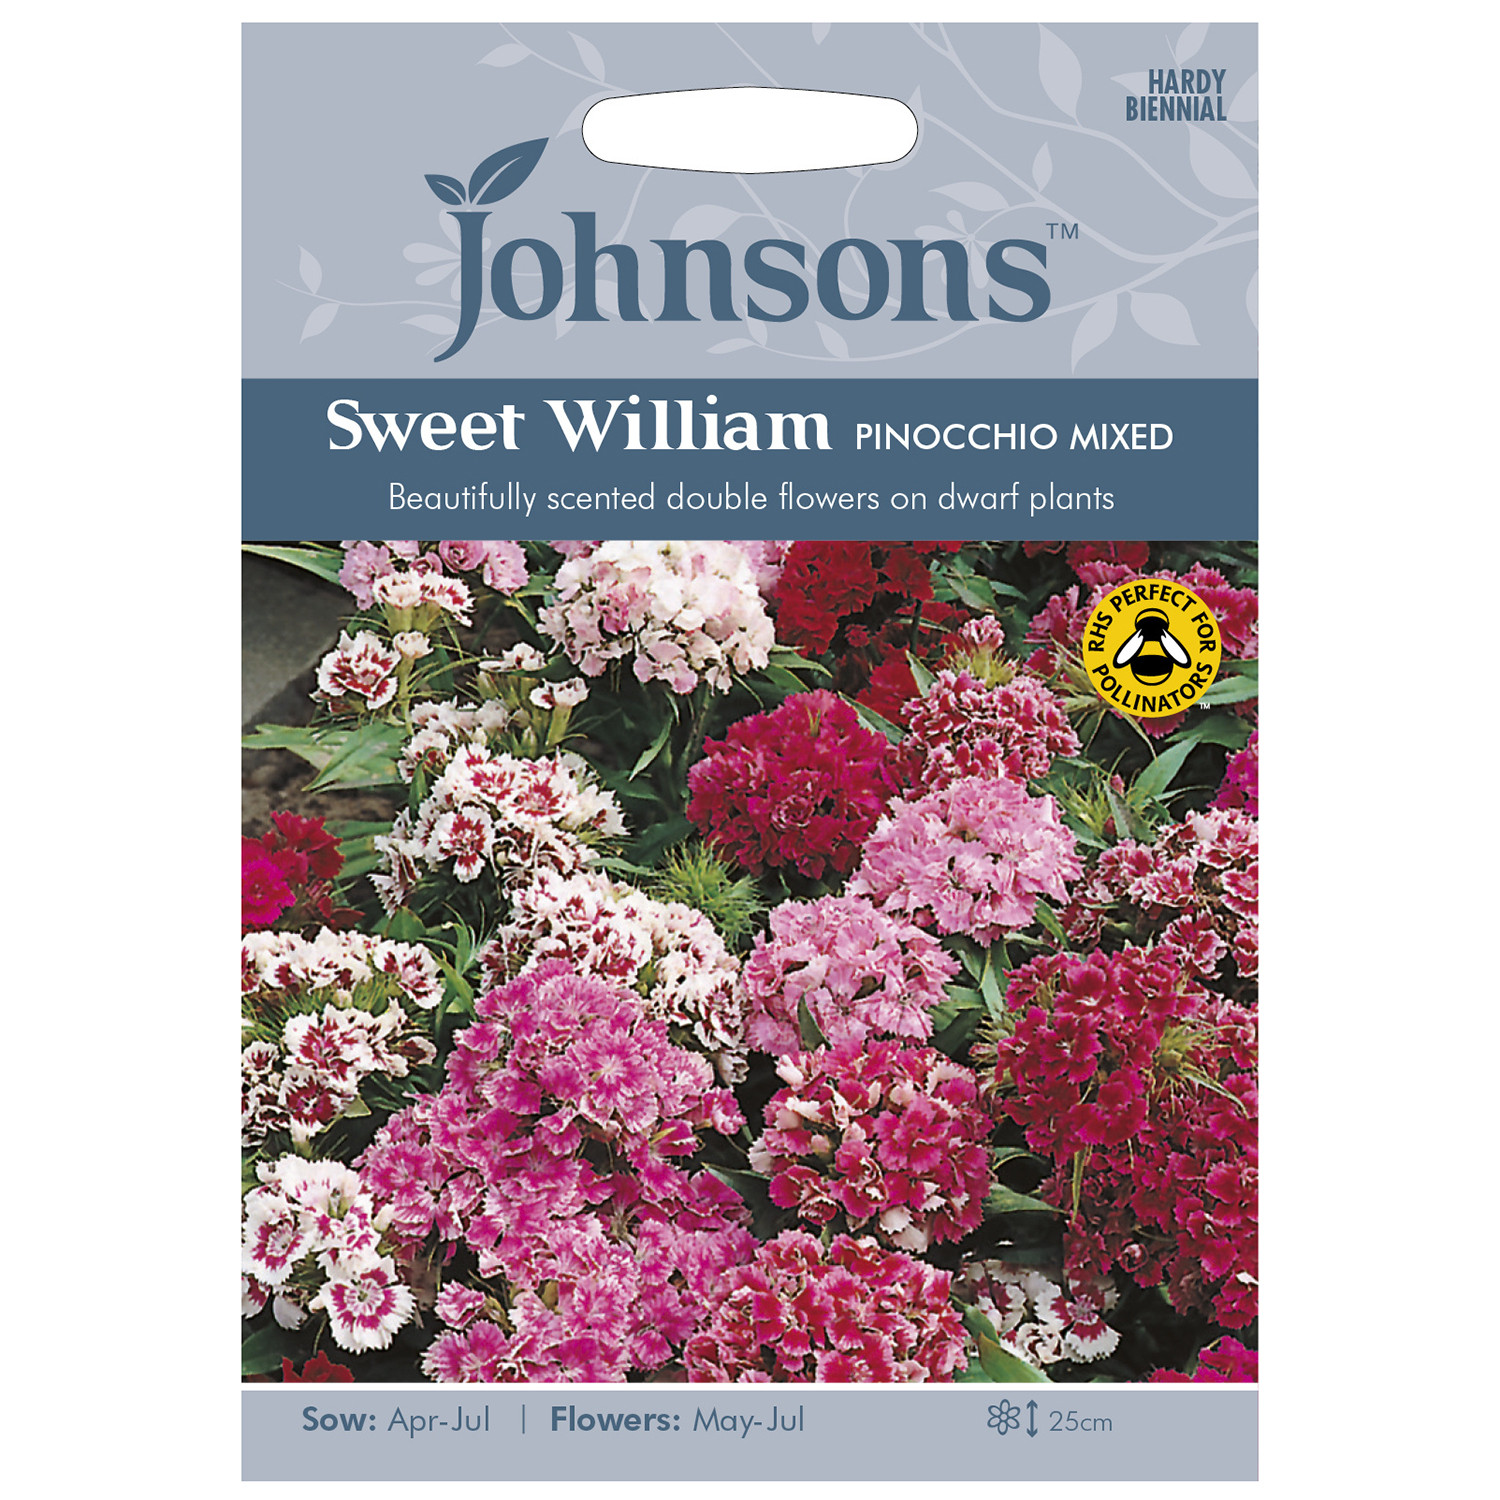 Pack of Pinocchio Mixed Sweet William Flower Seeds Image